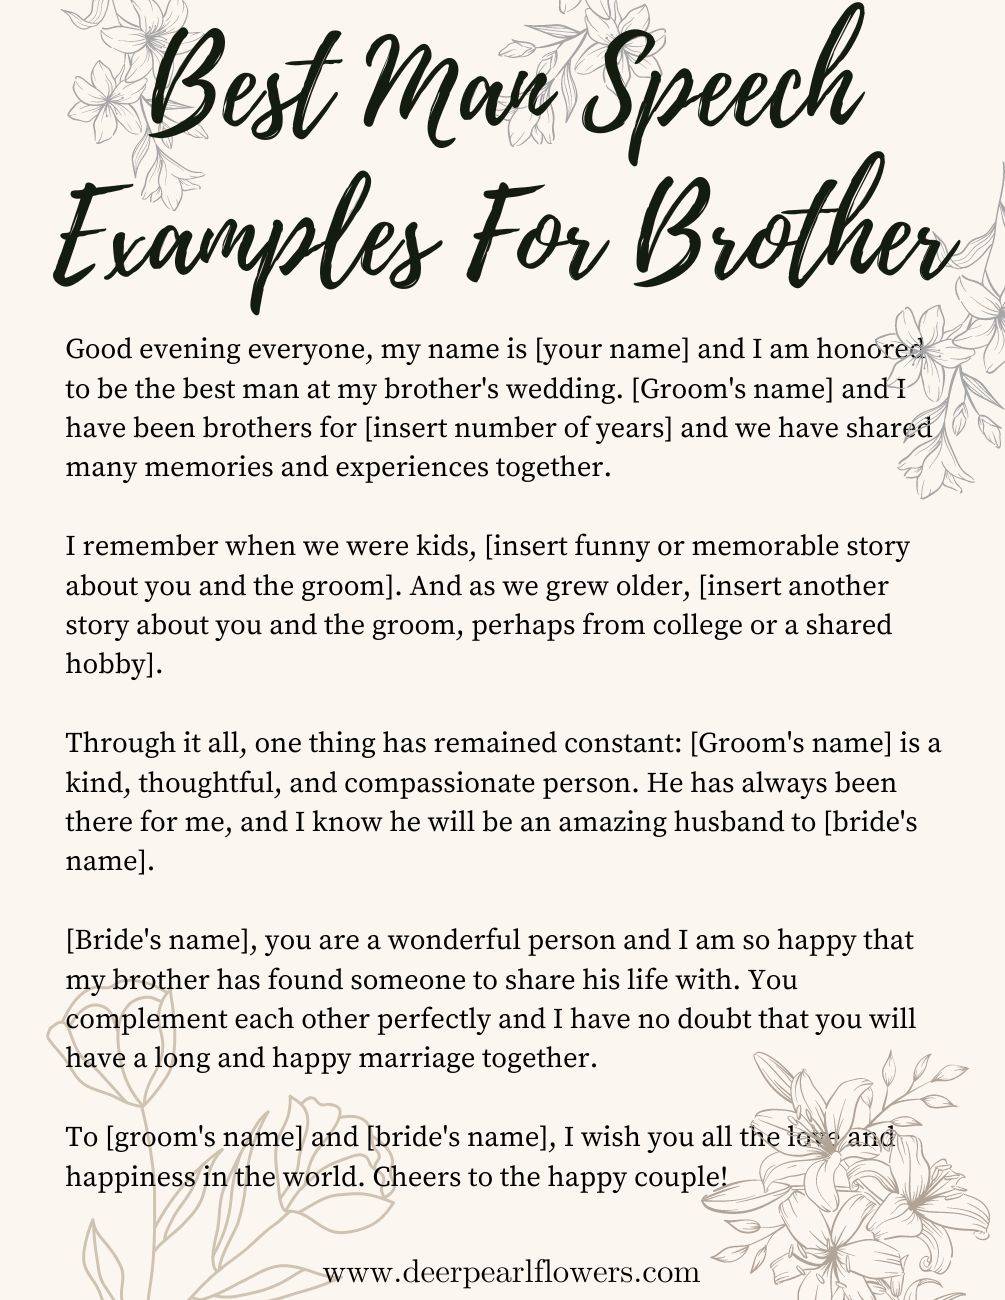 how to write a best man speech for a brother